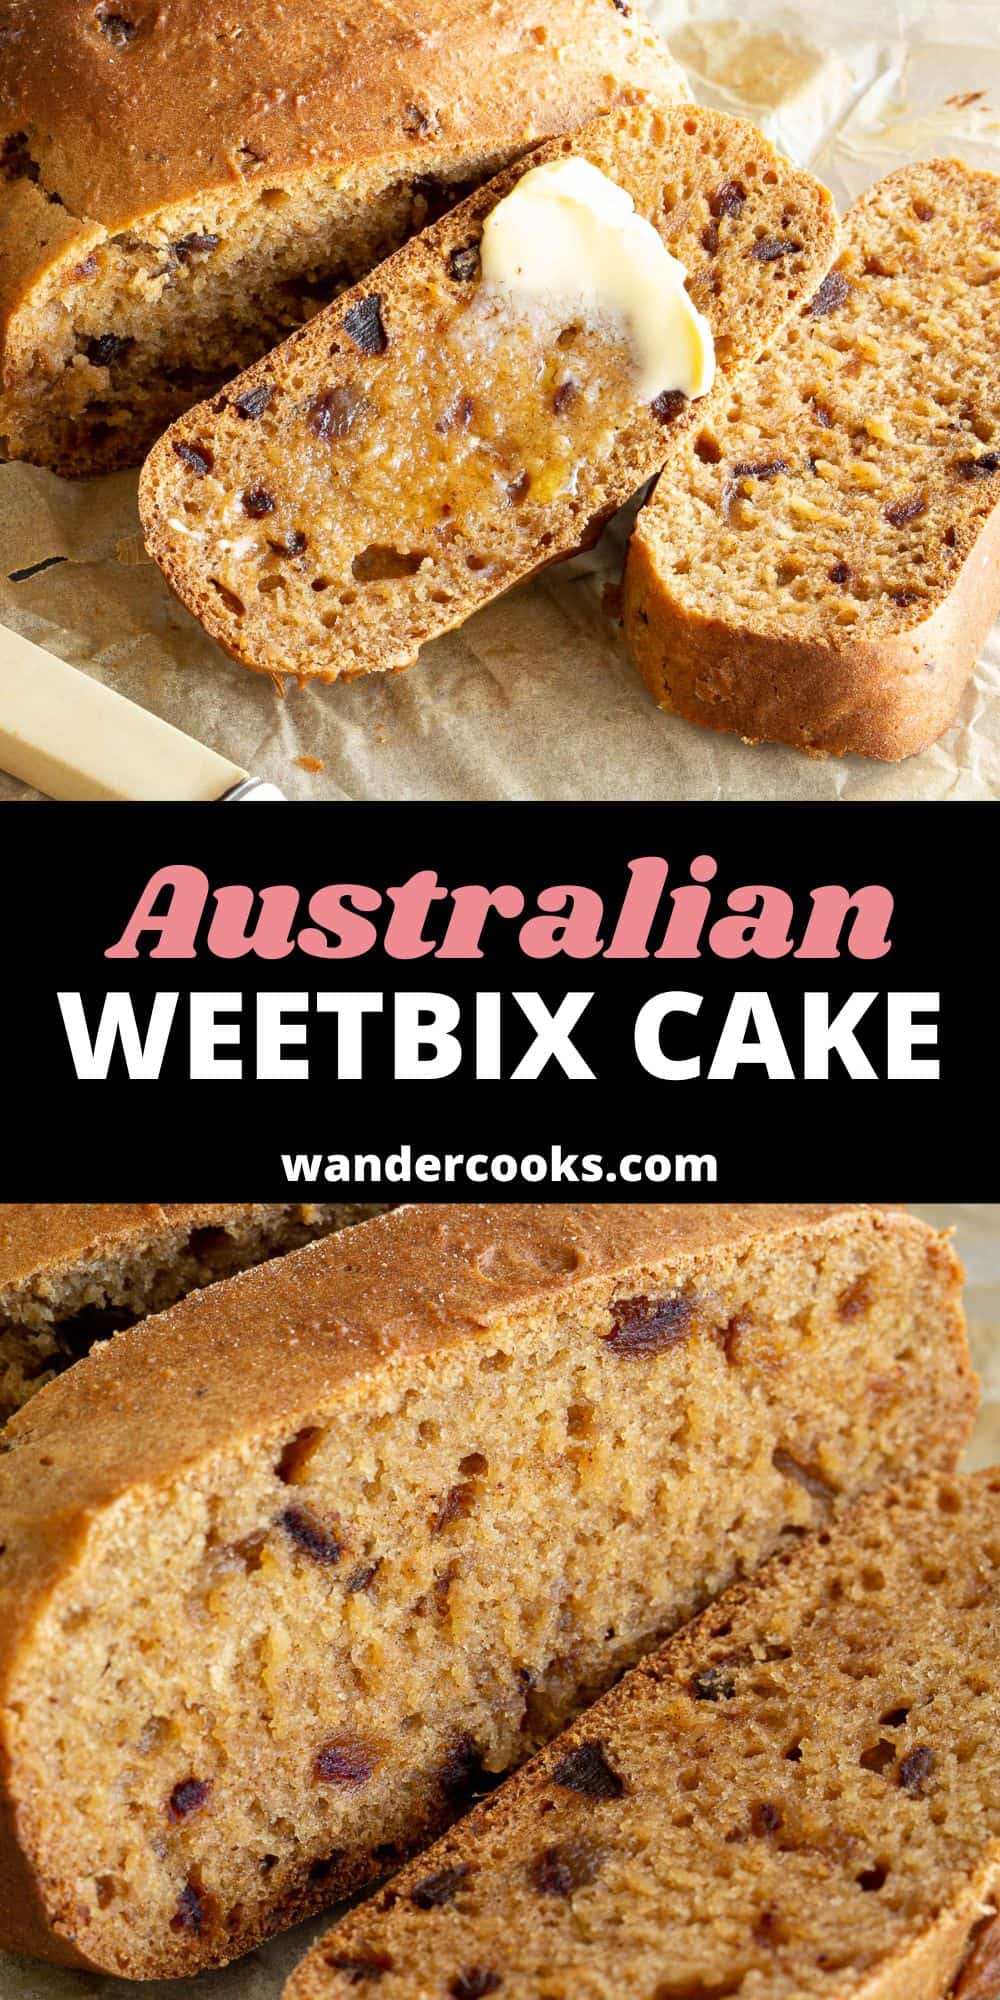 Weetbix Cake with Dates - Morning Tea Loaf